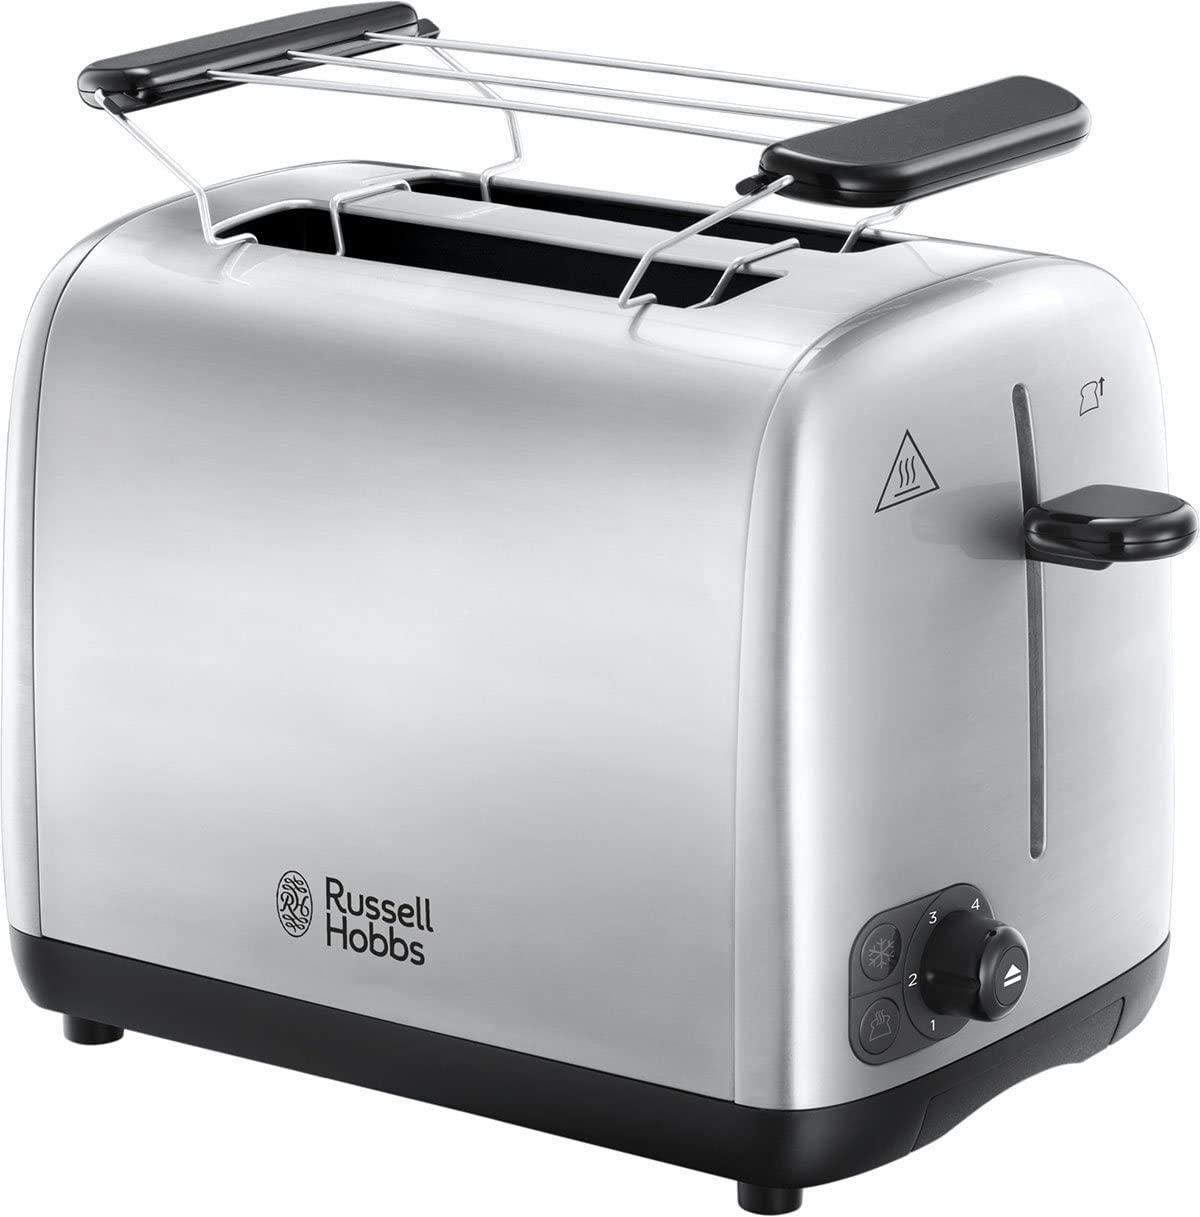 Russell Hobbs Toaster Adventure, Perfect Toast Technology, incl. Bun attachment, 6 adjustable browning levels + defrosting and warming function, 850 watts, 24080-56, stainless steel